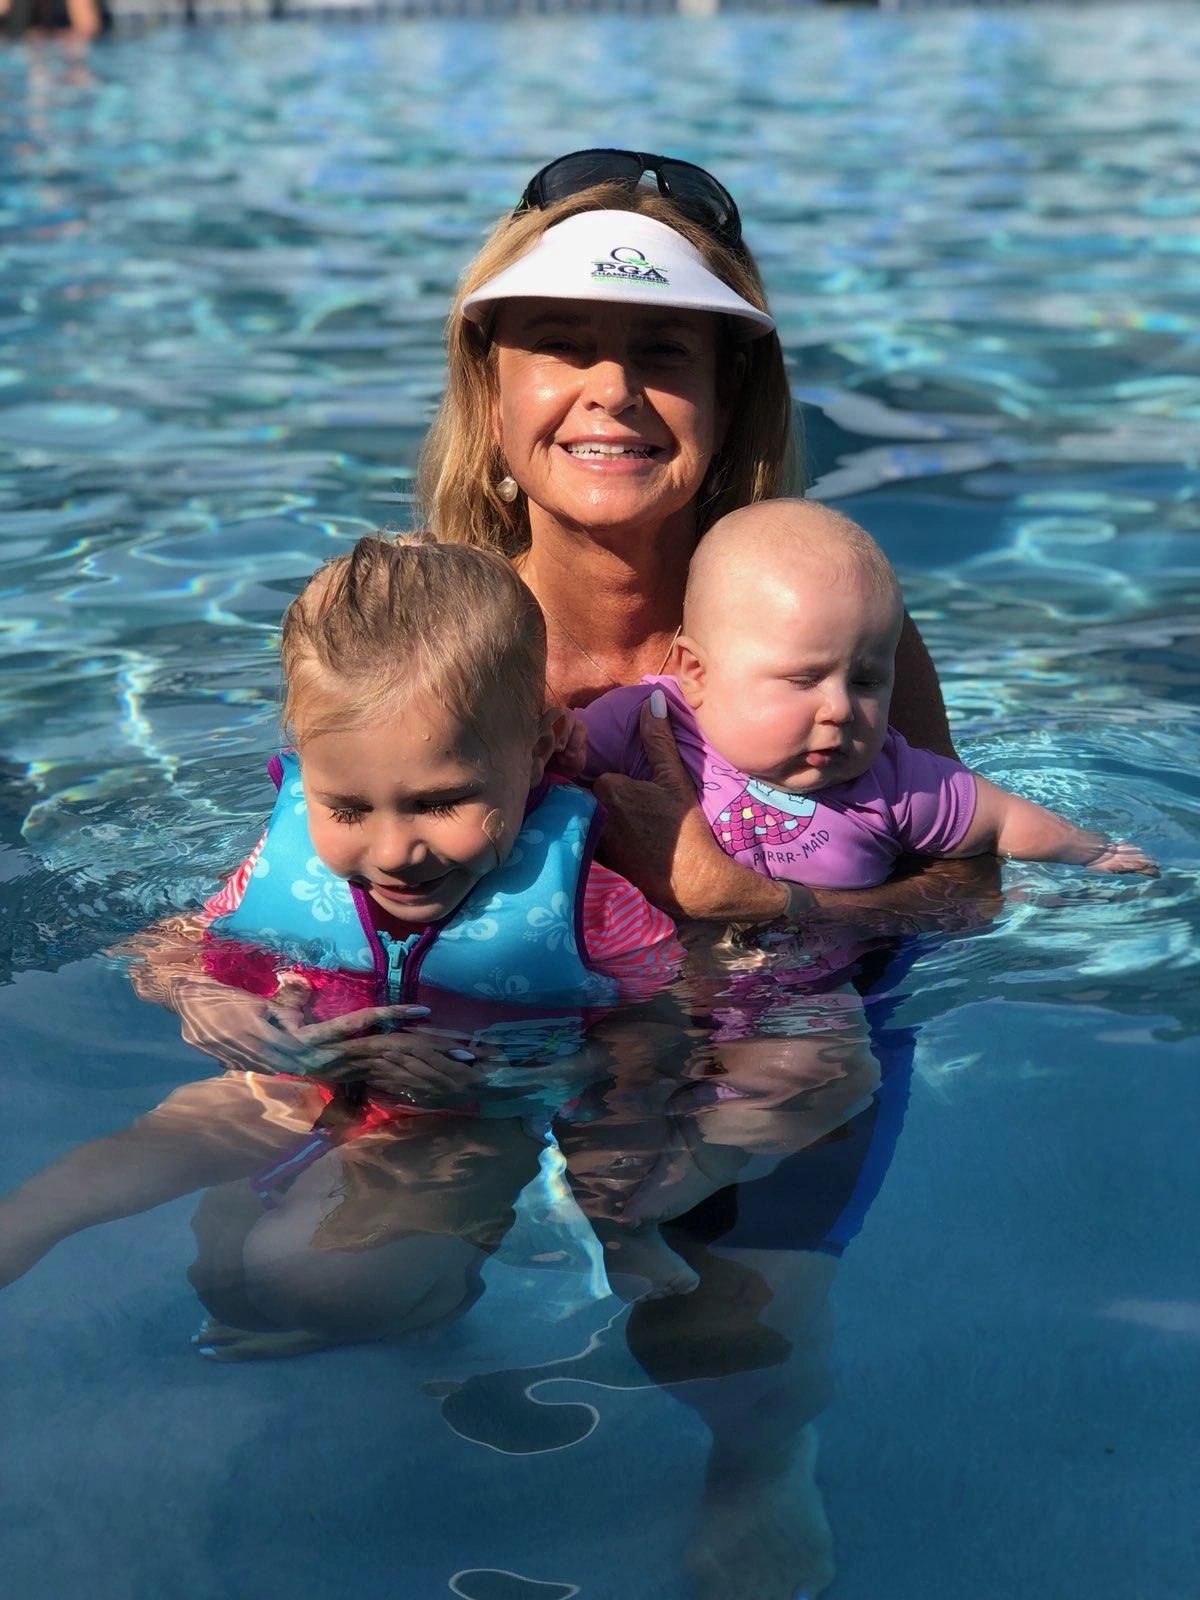 A 4 month old baby and her 3 year old sister at swim lessons.